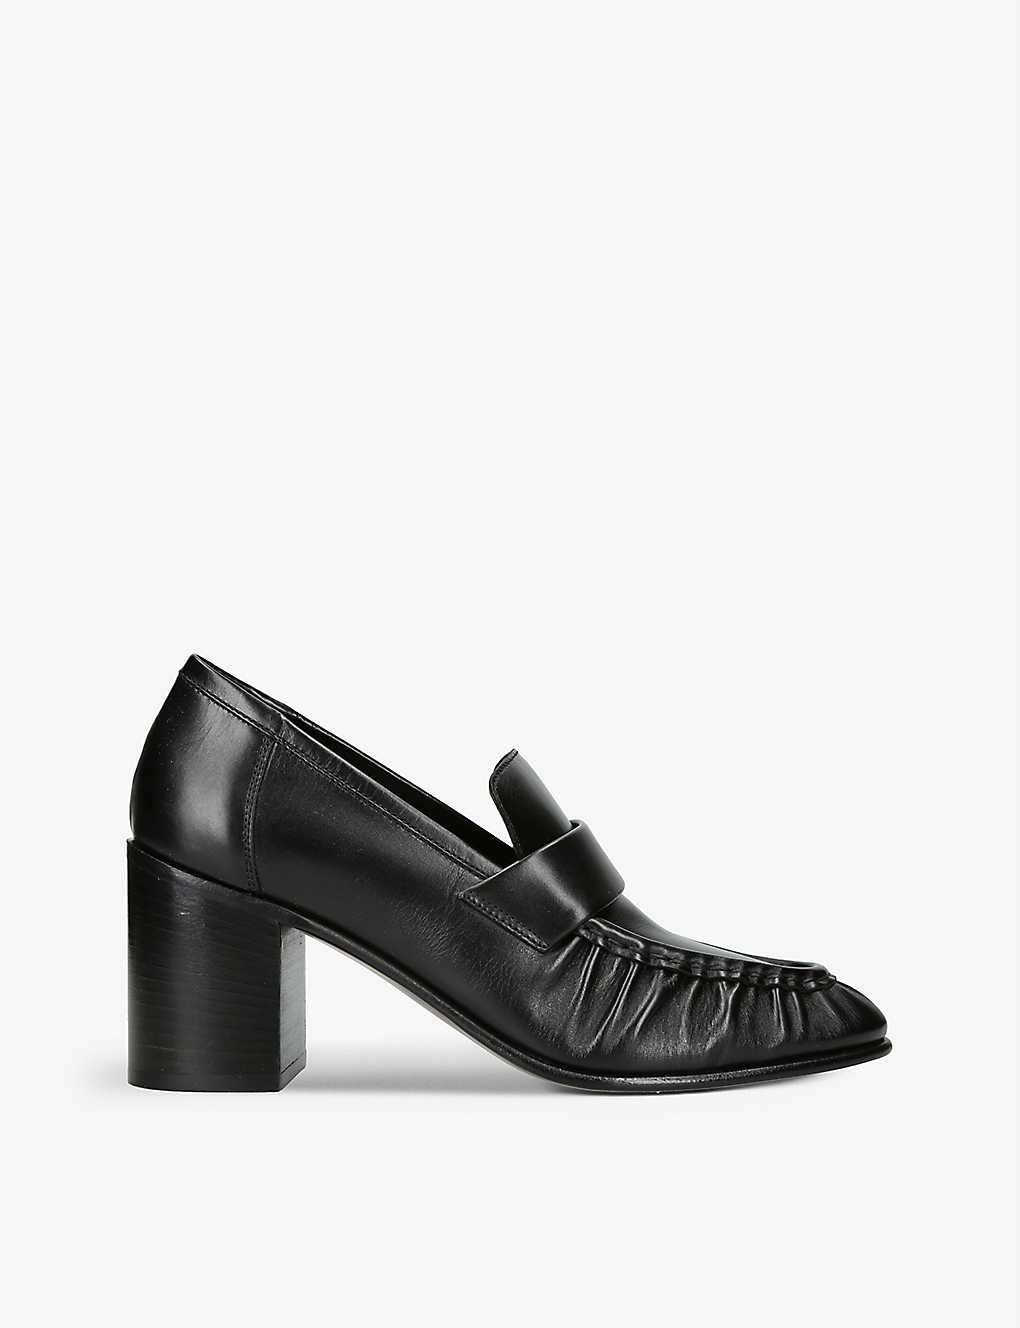 THE ROW THE ROW WOMEN'S BLACK LOAFER LEATHER HEELED COURTS,61416575